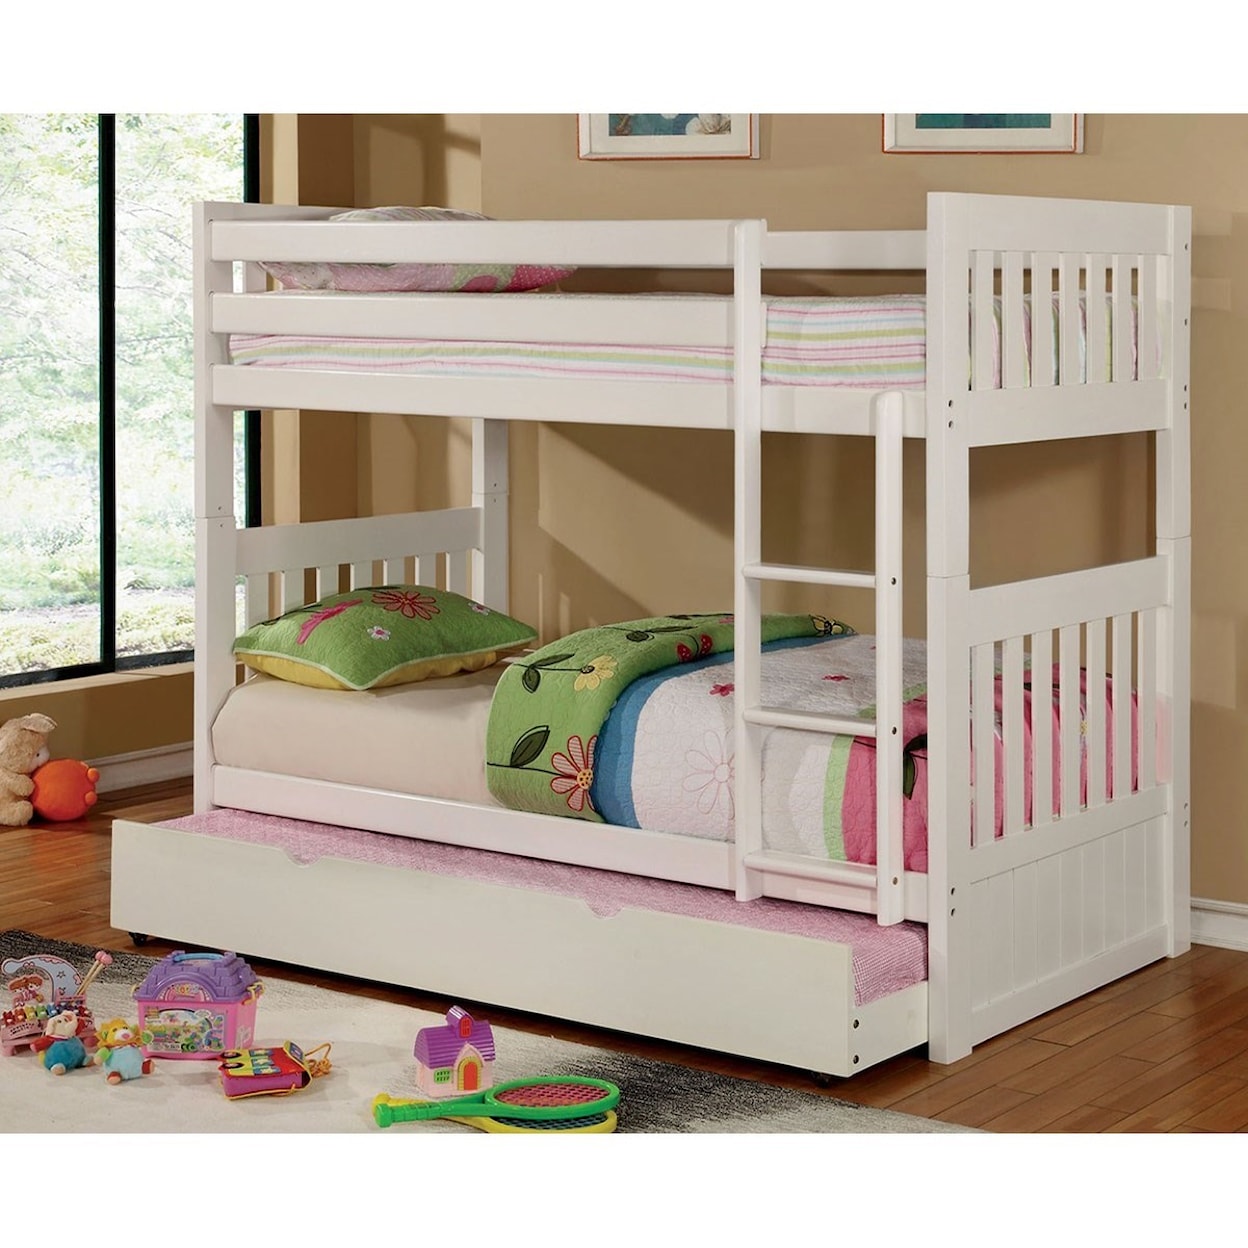 FUSA Canberra II Twin/Full Bunk Bed